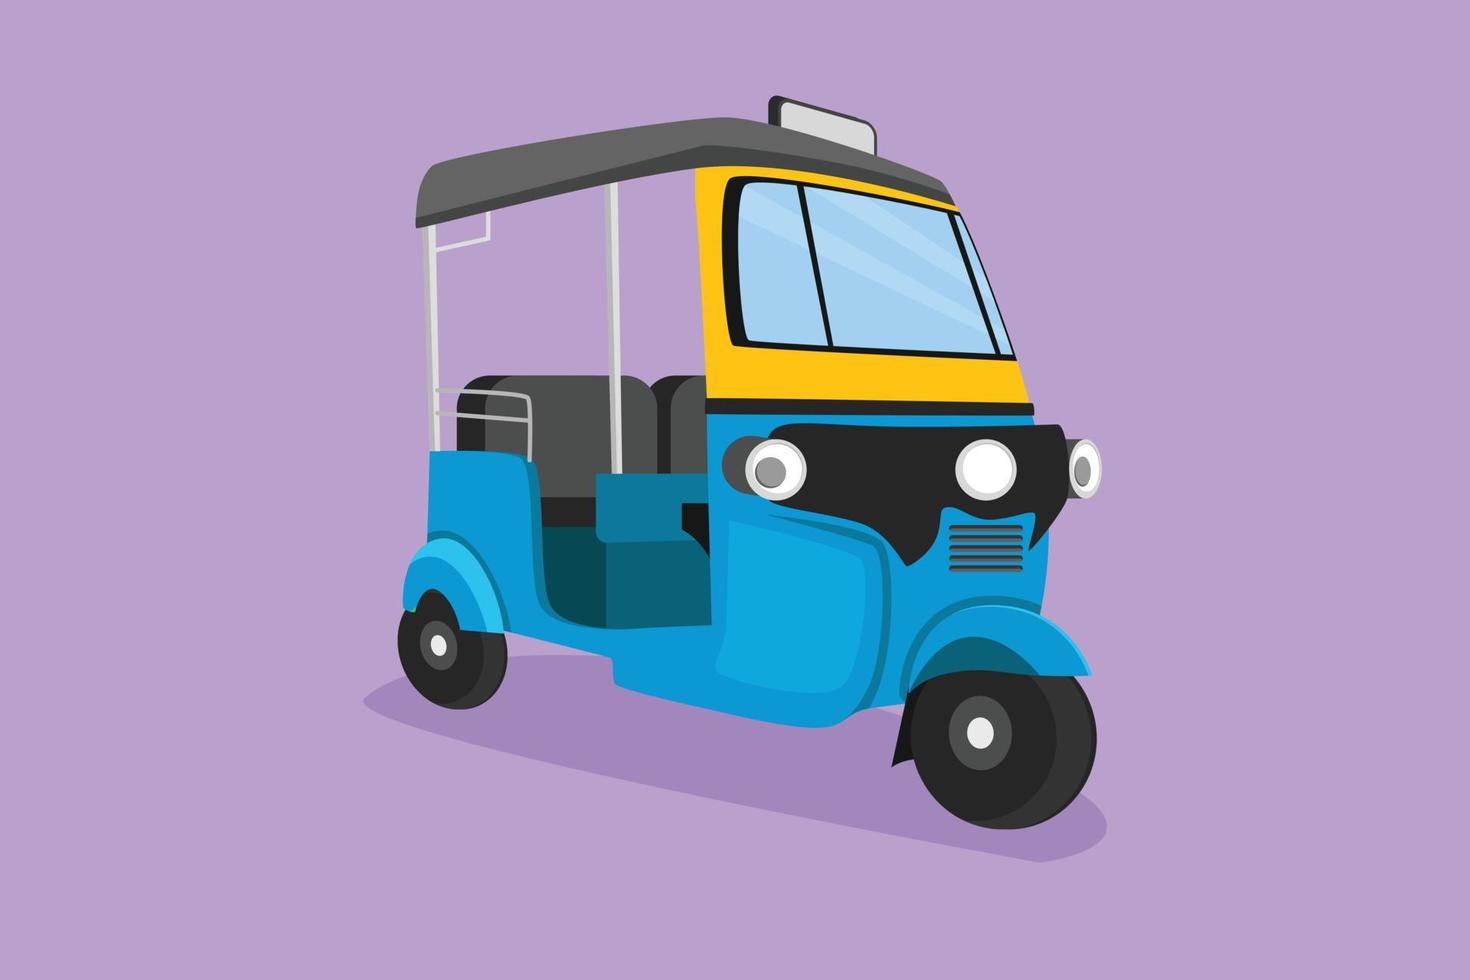 Character flat drawing Tuk Tuk Thailand often used by tourists as means of transportation to get around tourist attractions in Thailand. Traditional vehicle on road. Cartoon design vector illustration